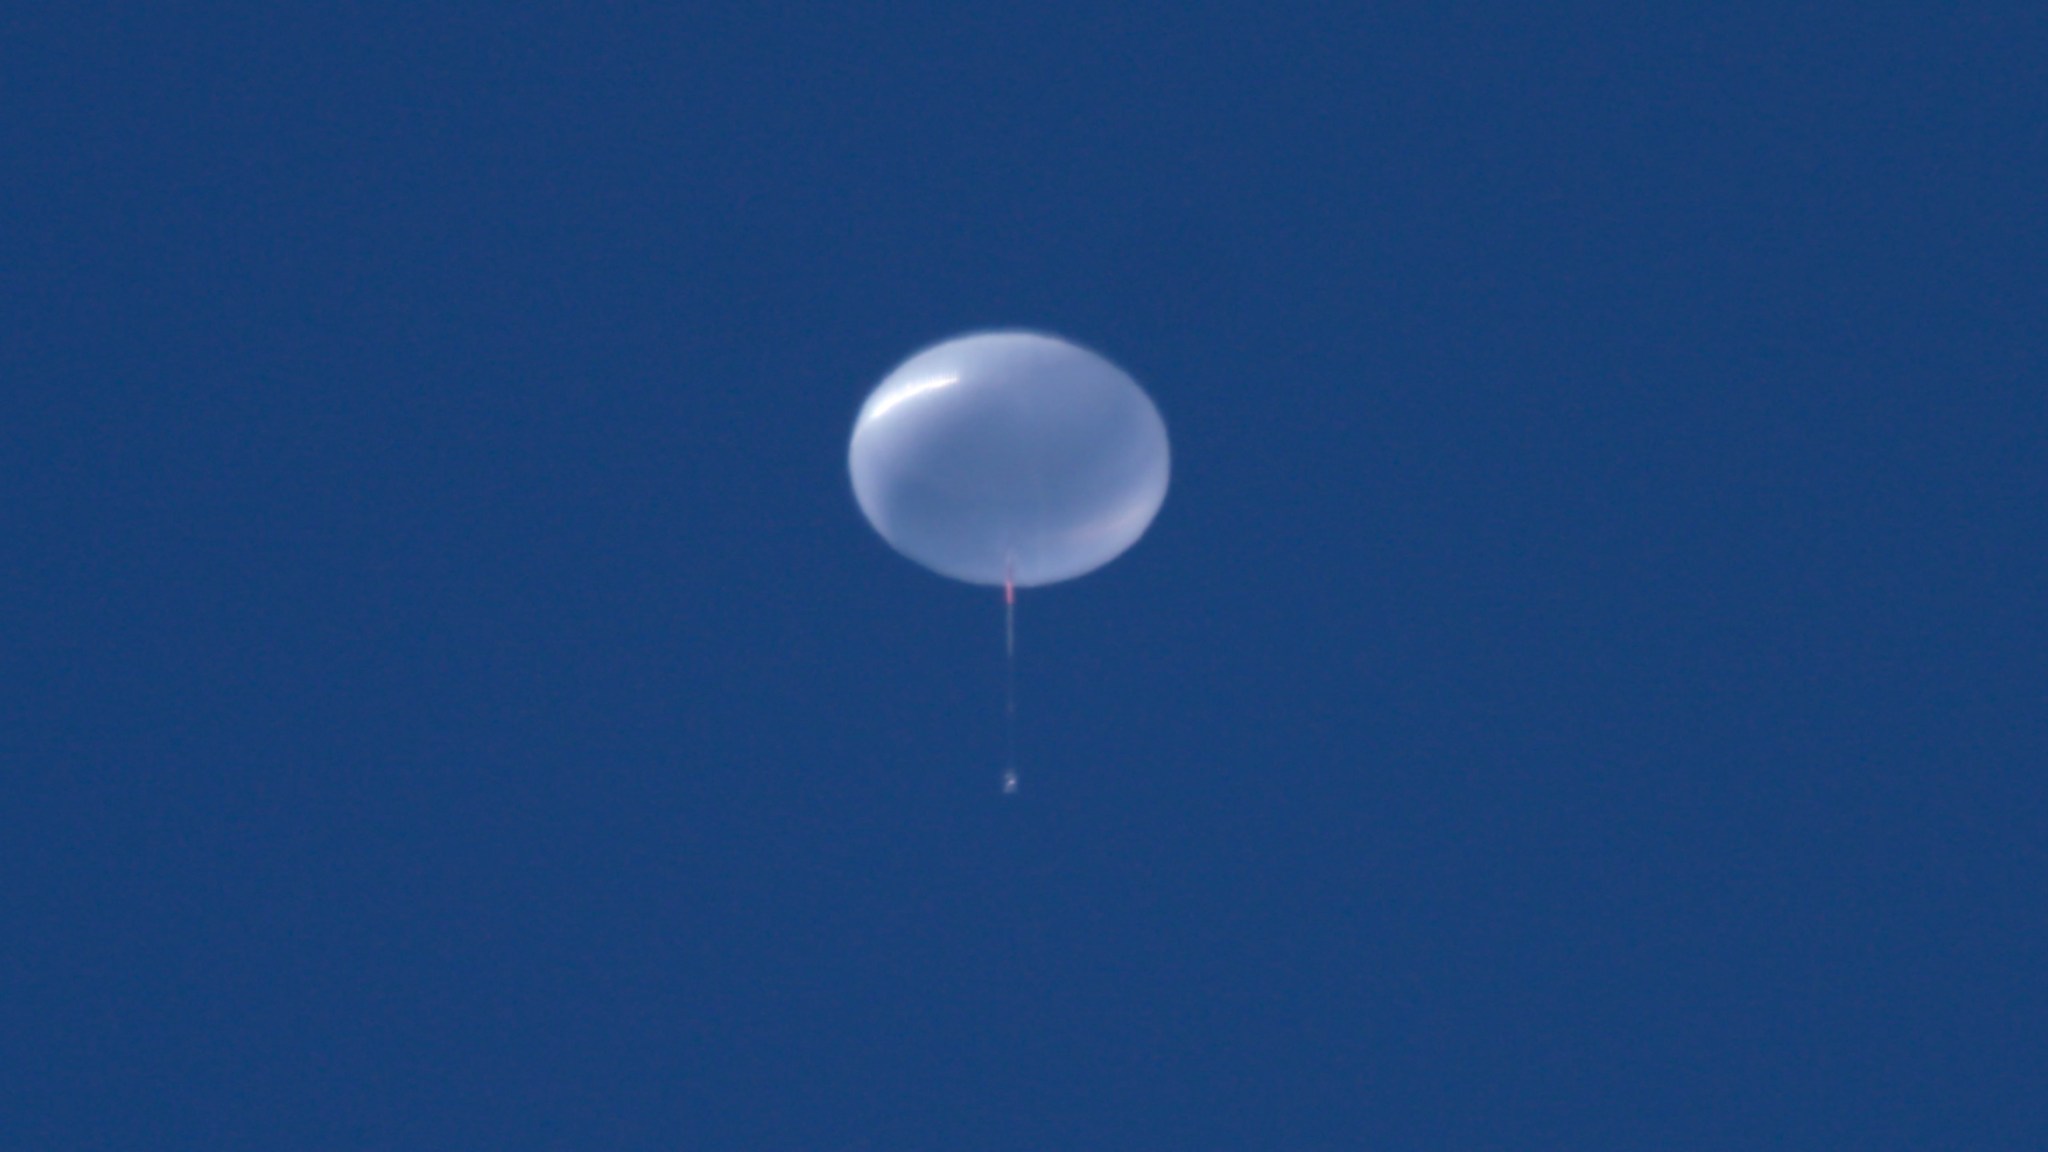 A scientific balloon fully inflated floating in the sky. It appears plastic and clear against a clear blue sky.